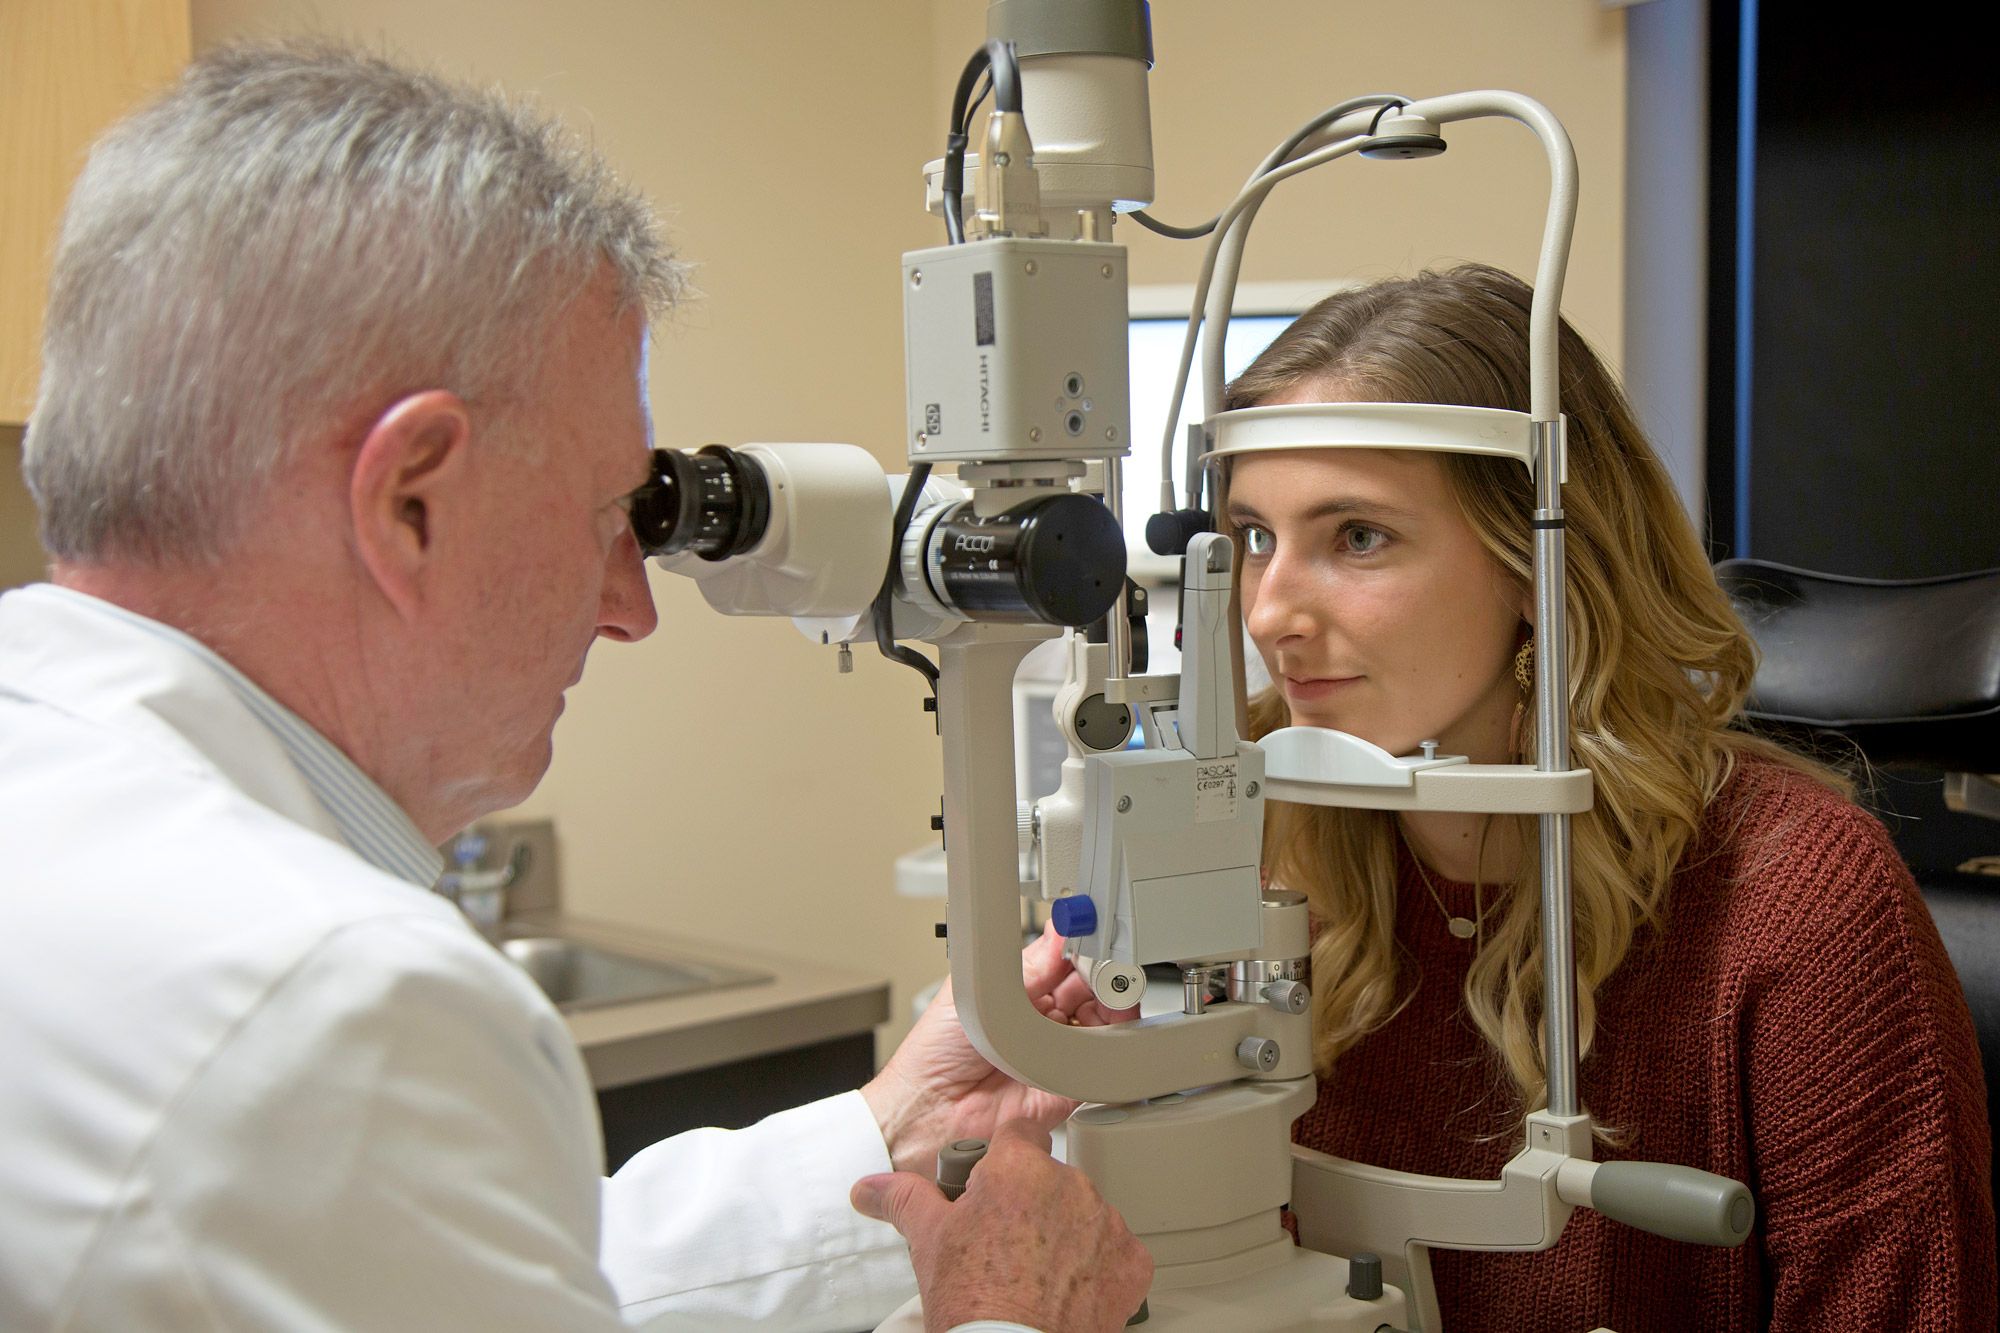 Exceptional Eye Care Services by Leading Optometrists in Davidson, NC